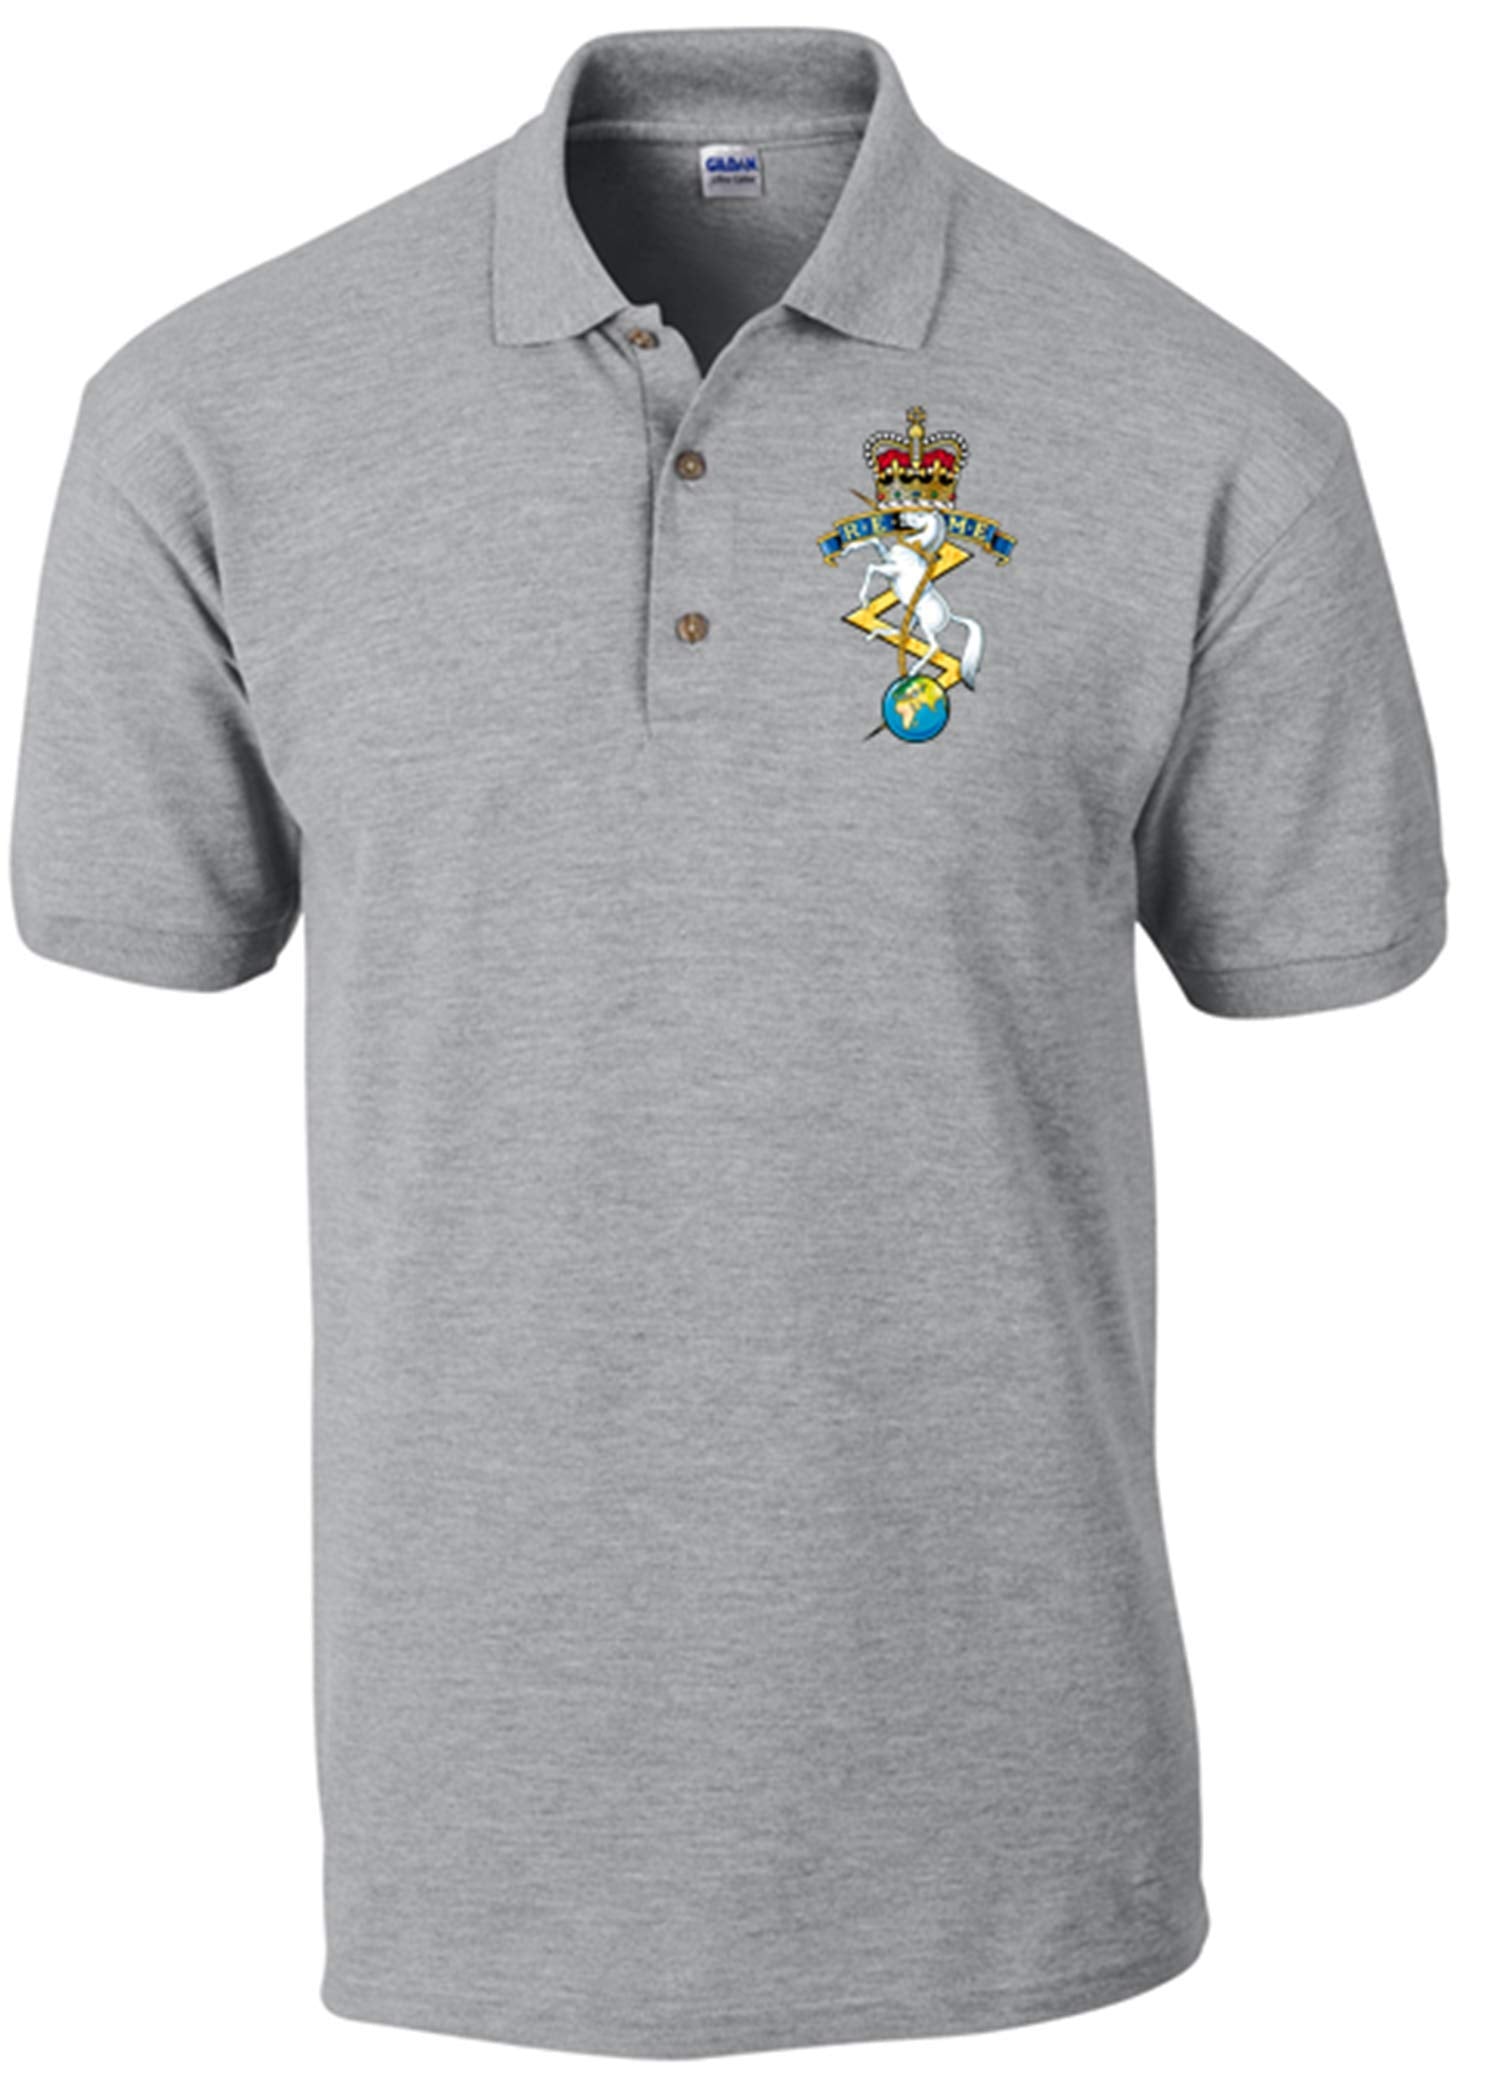 REME Polo Shirt Official MOD Approved Merchandise - Army 1157 kit Grey / S Army 1157 Kit